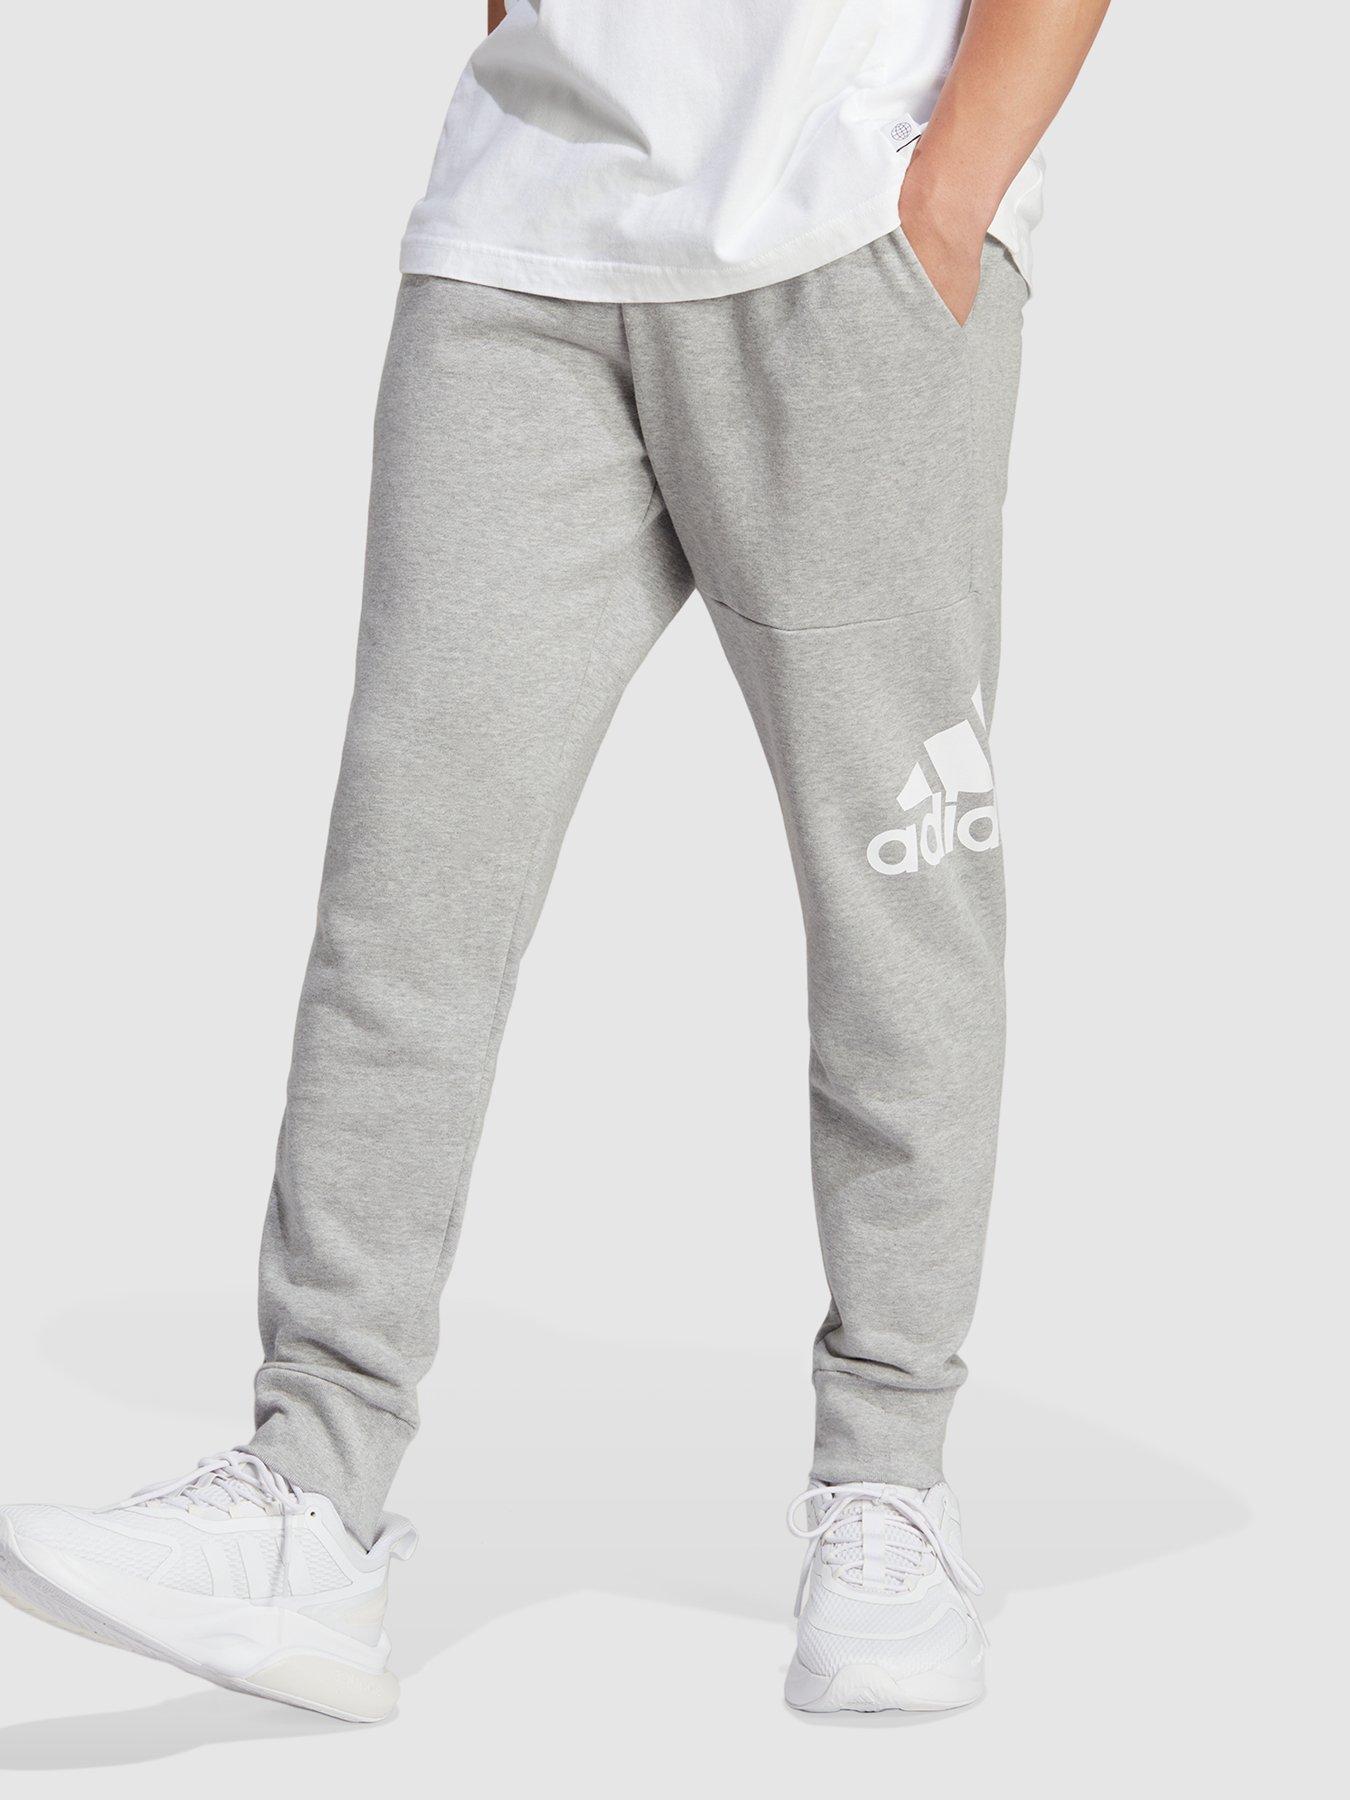 | Jogging bottoms | Mens sports | Sports & leisure Very